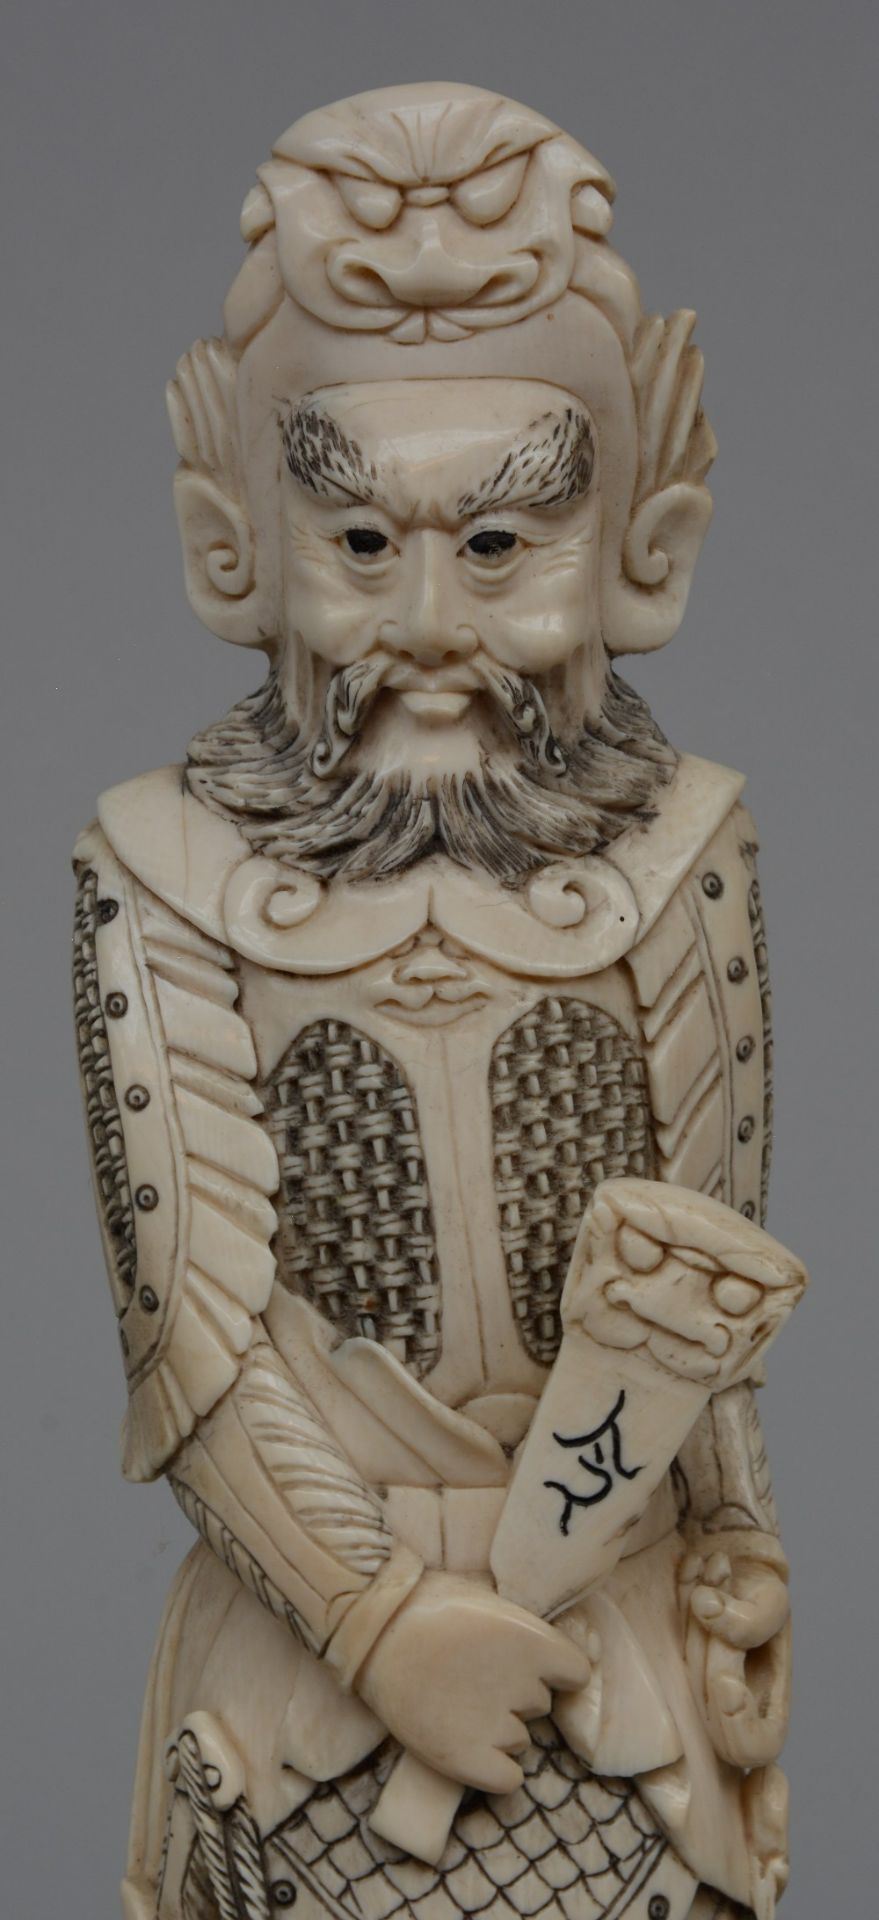 A Chinese ivory carved warrior on a wooden base, ca. 1900, H 35 cm - Image 5 of 6